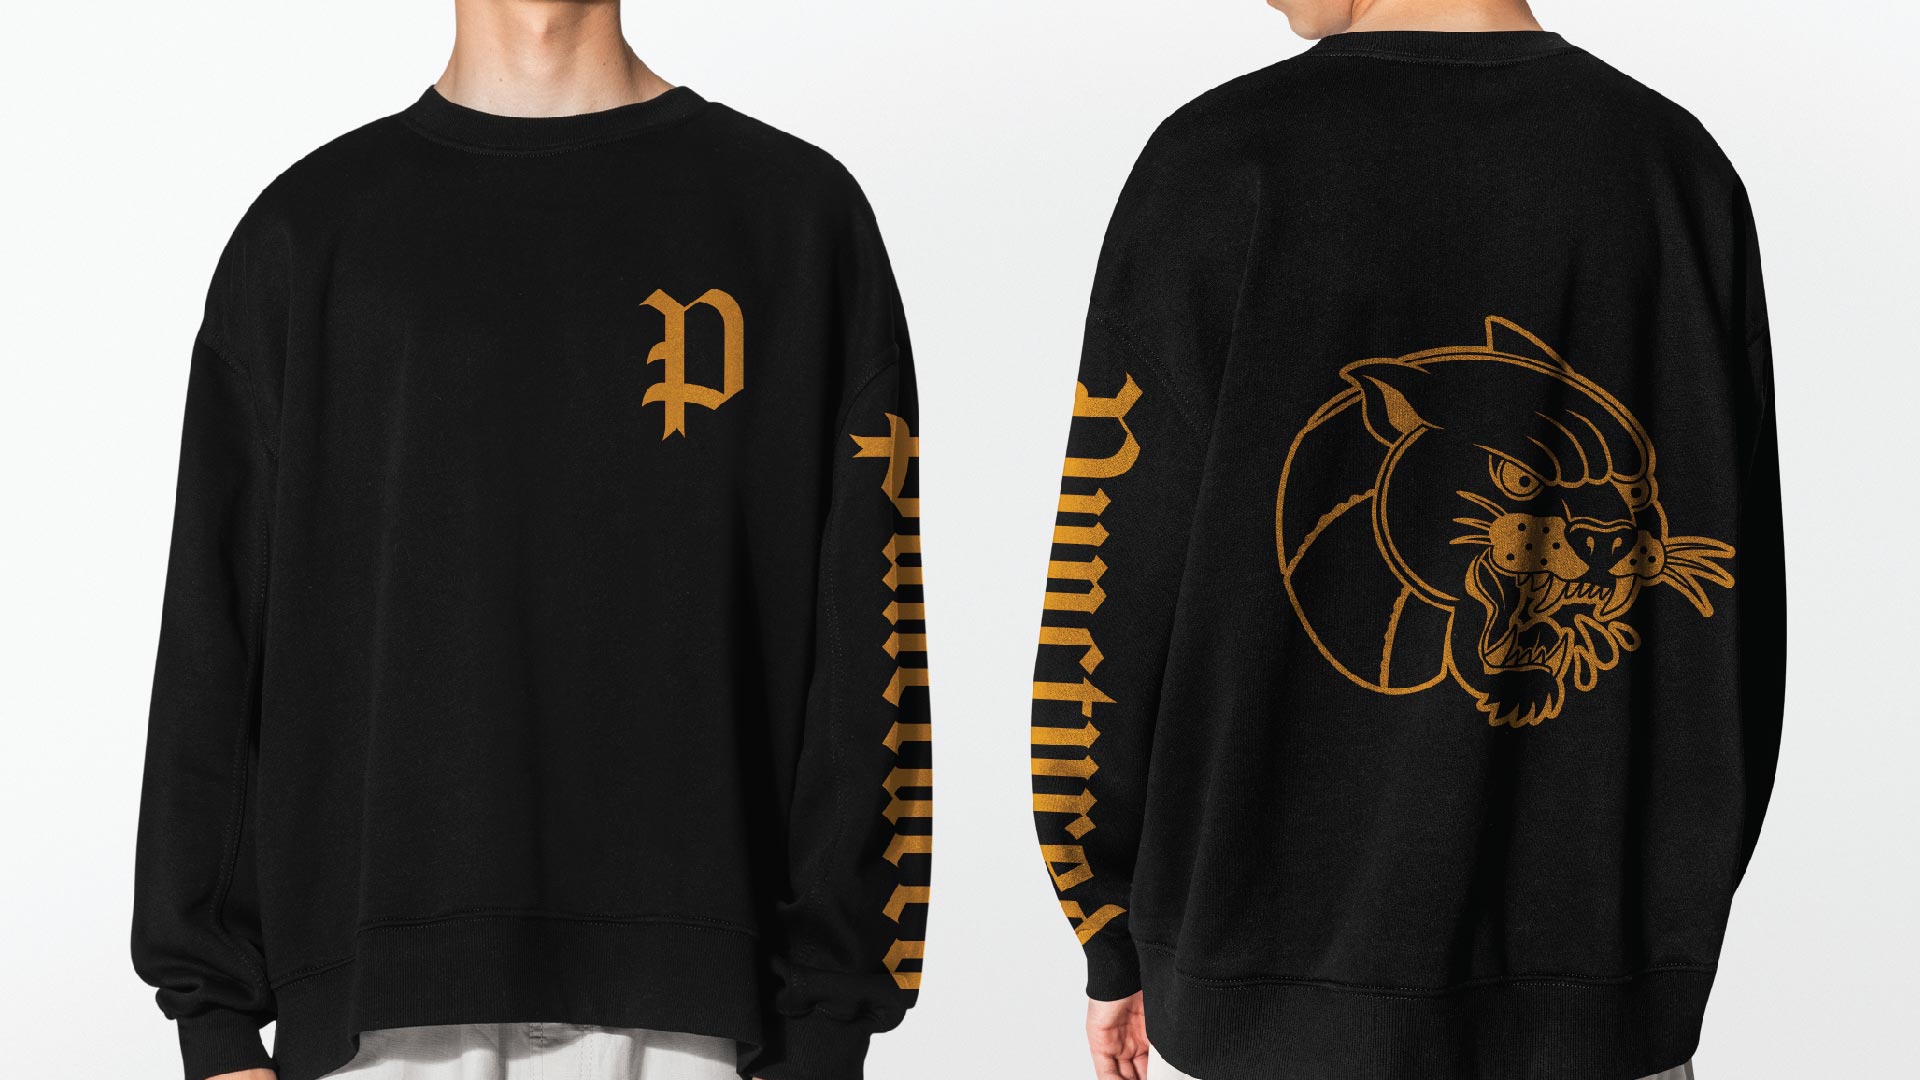 Black Sweatshirt with a yellow panther head on the back, 'P' on the chest, and 'Punctured' Down the left arm